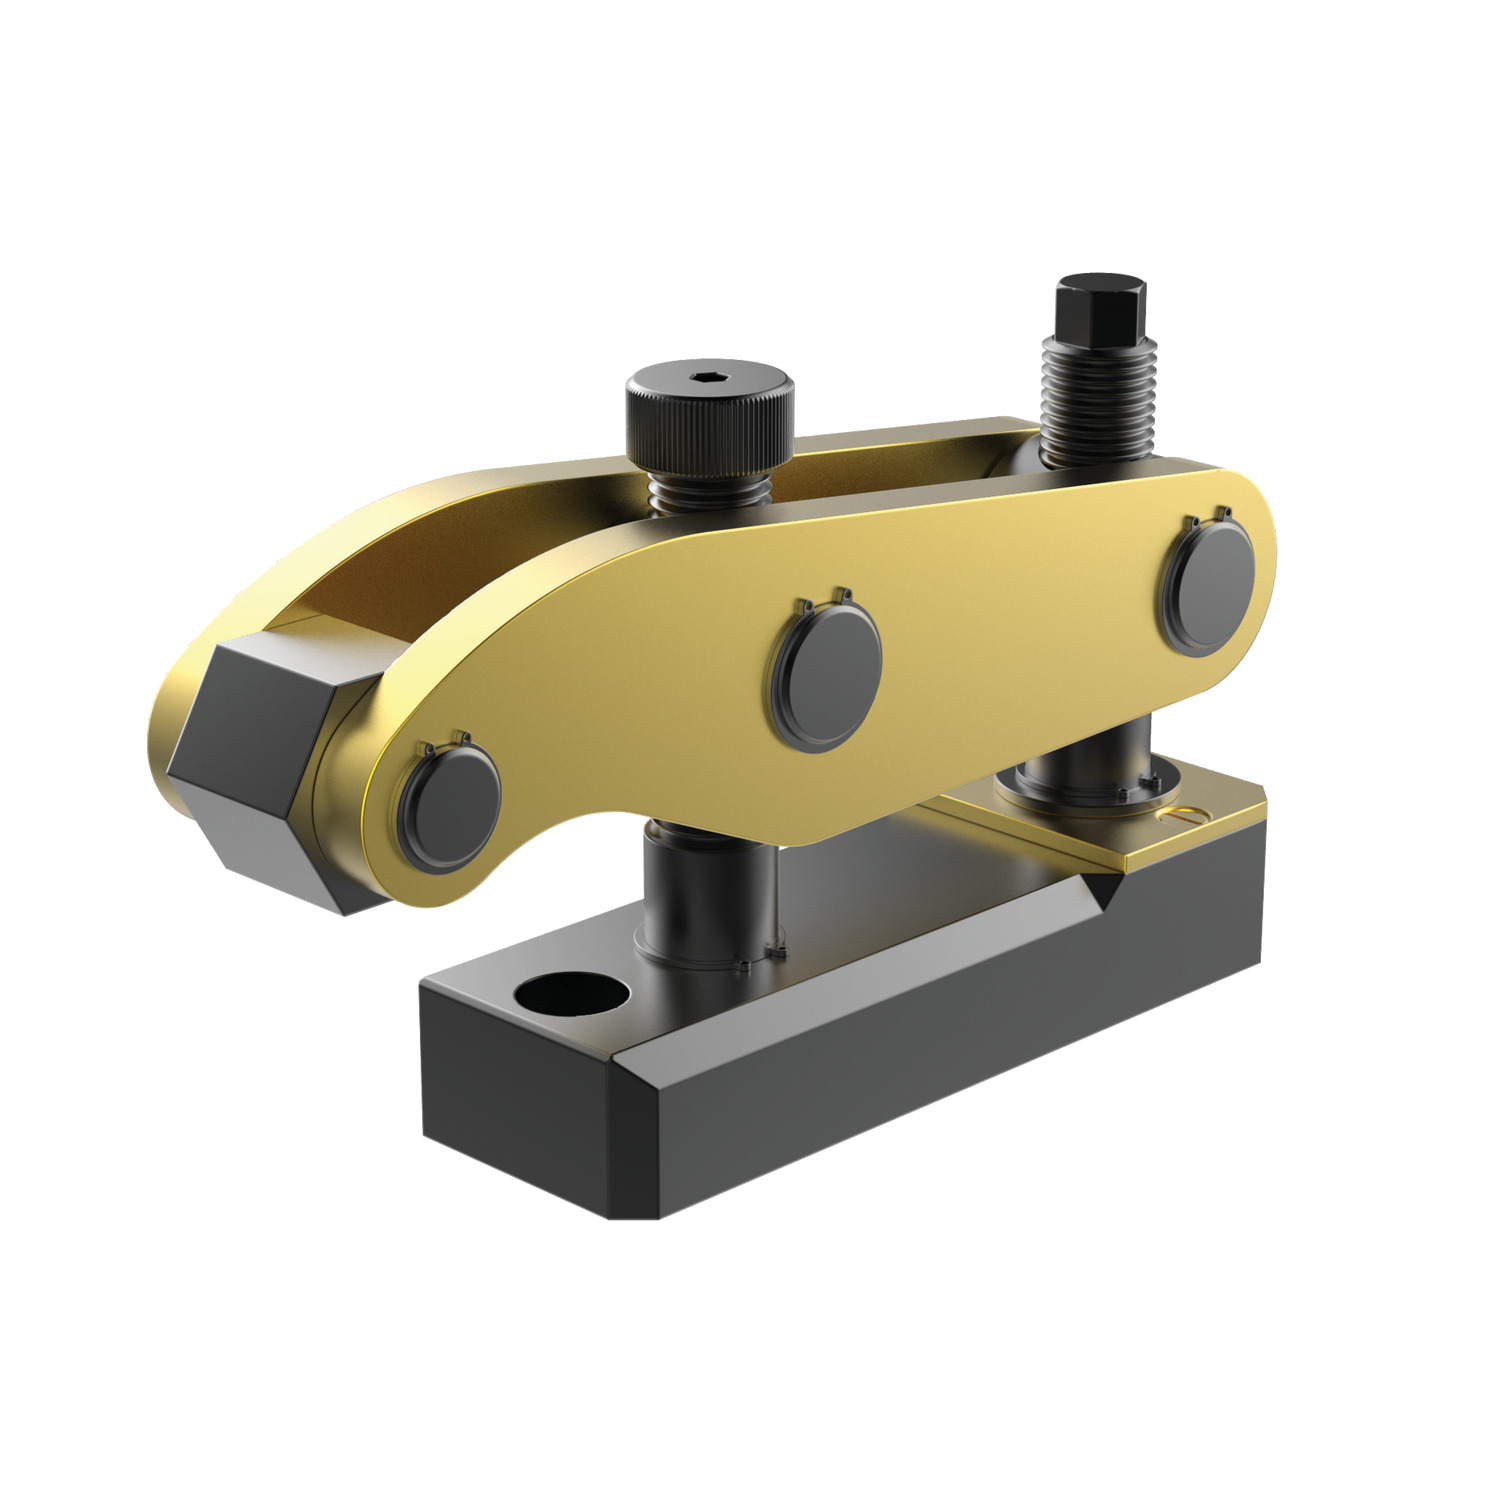 Bloca Press Clamps The Kopal Blocapress Clamps are made from hardened steel which makes them ideal to clamp press tools with clamping forces of 50kN.